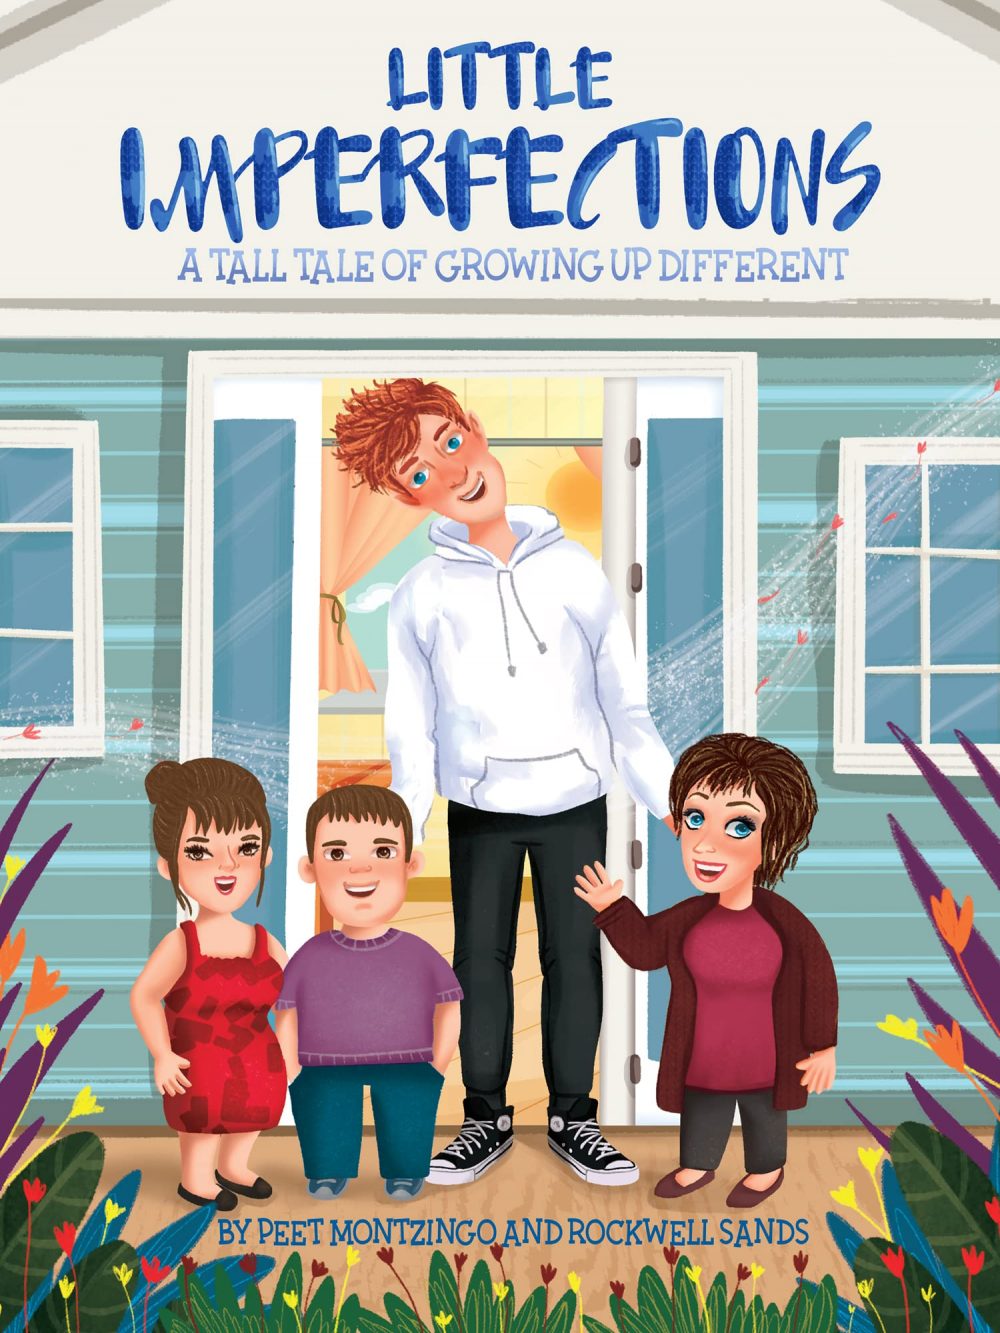 Little Imperfections by Peet Montzingo and Rockwell Sands